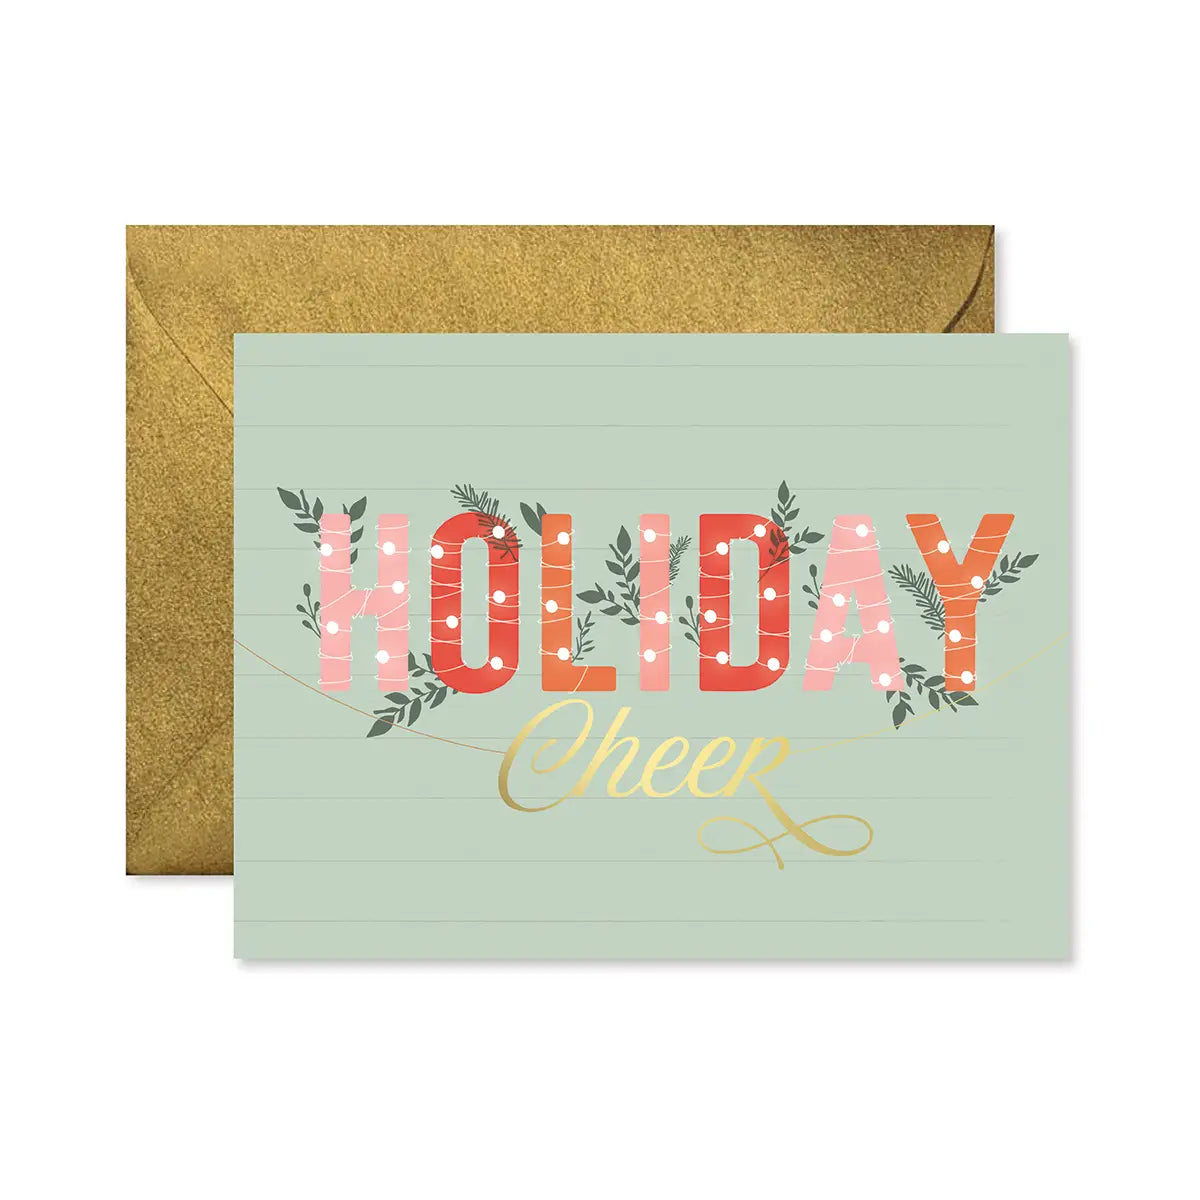 gold and sage green holiday cheer card Christmas gift for her greeting cards unique made in the USA small woman-owned business classic pink and red